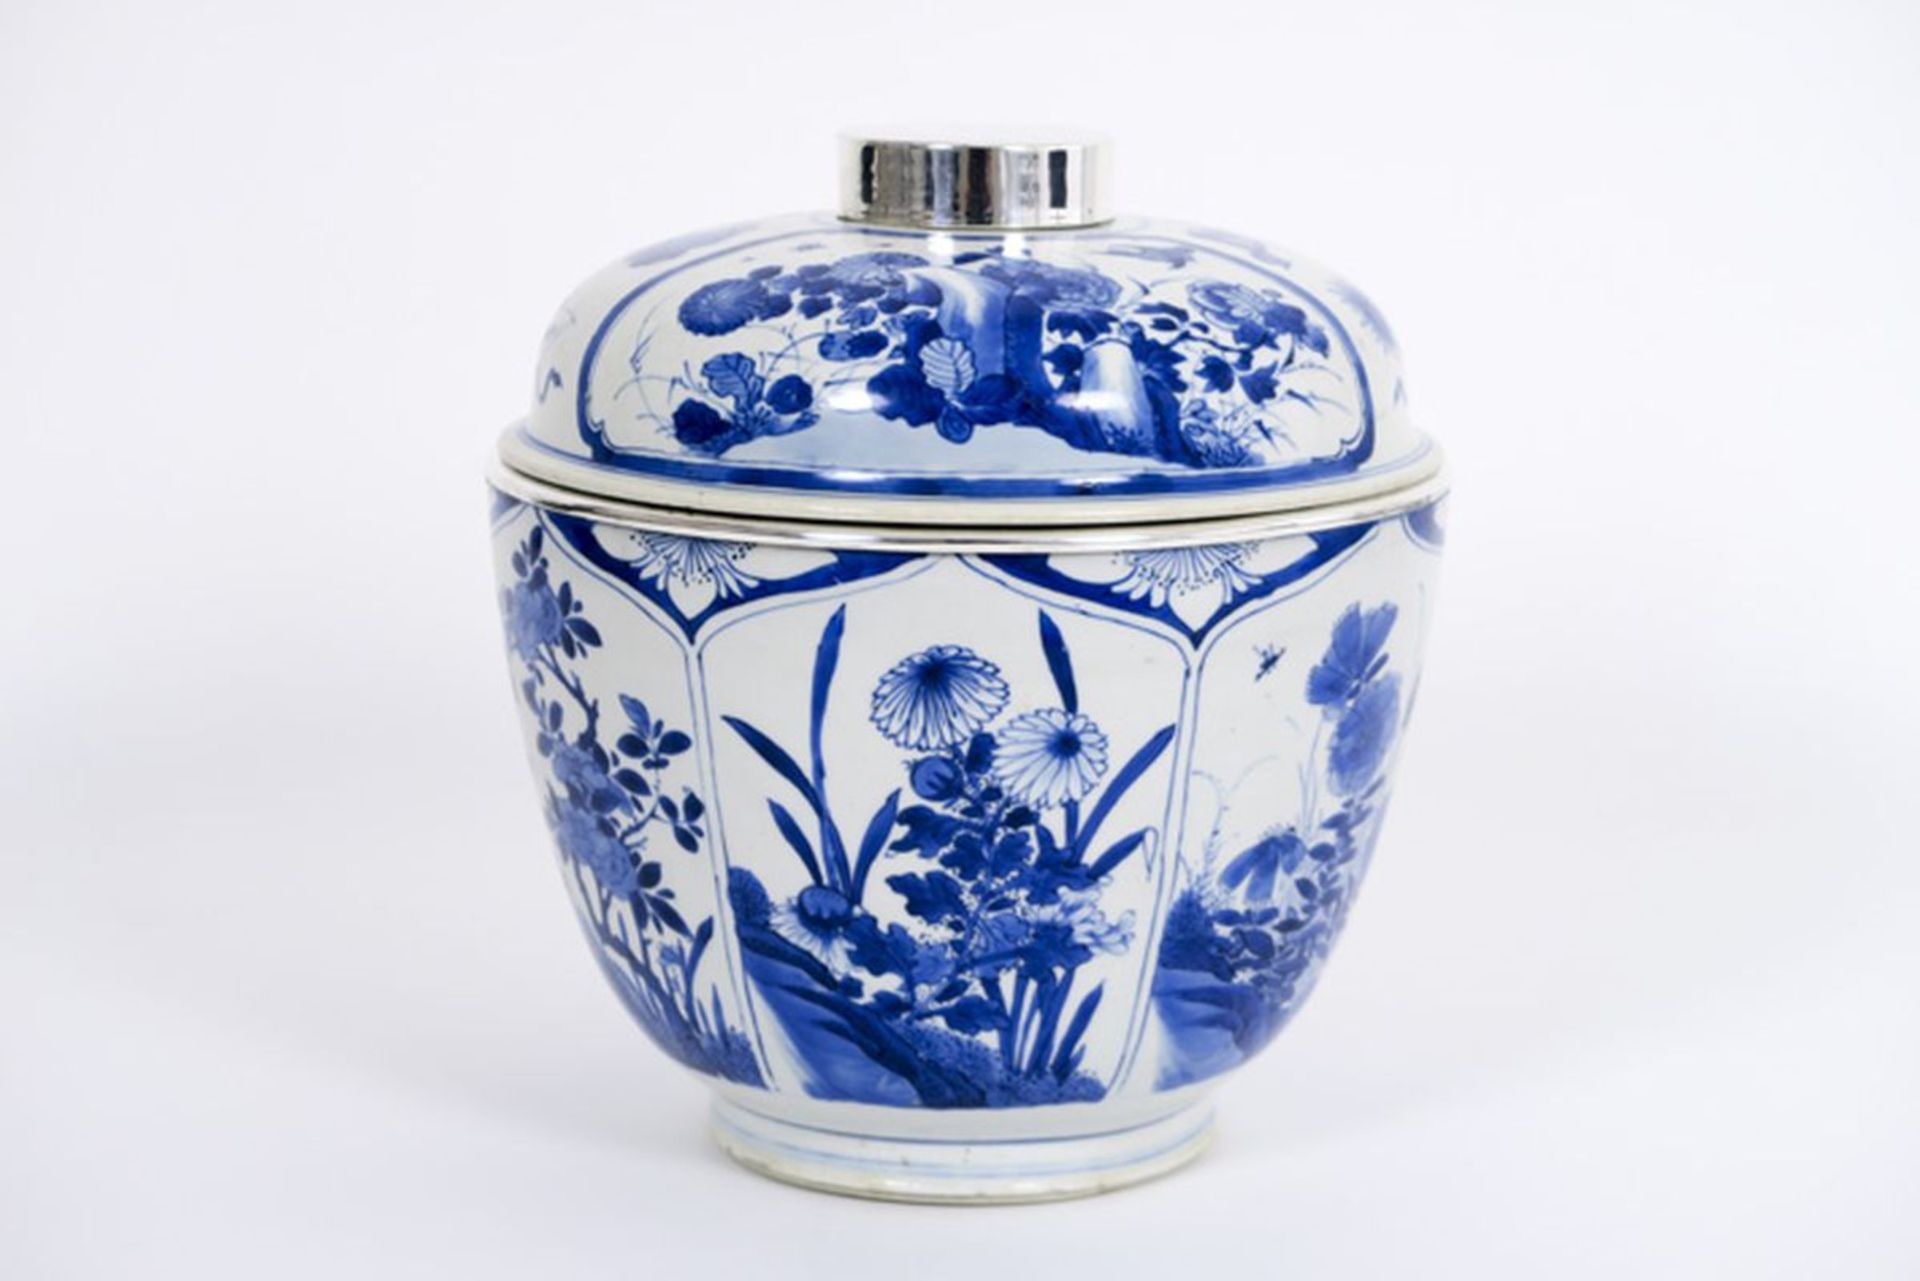 17th Cent. Chinese Kang Hsi lidded bowl in porcelain with a blue-white decor with [...] - Image 2 of 4